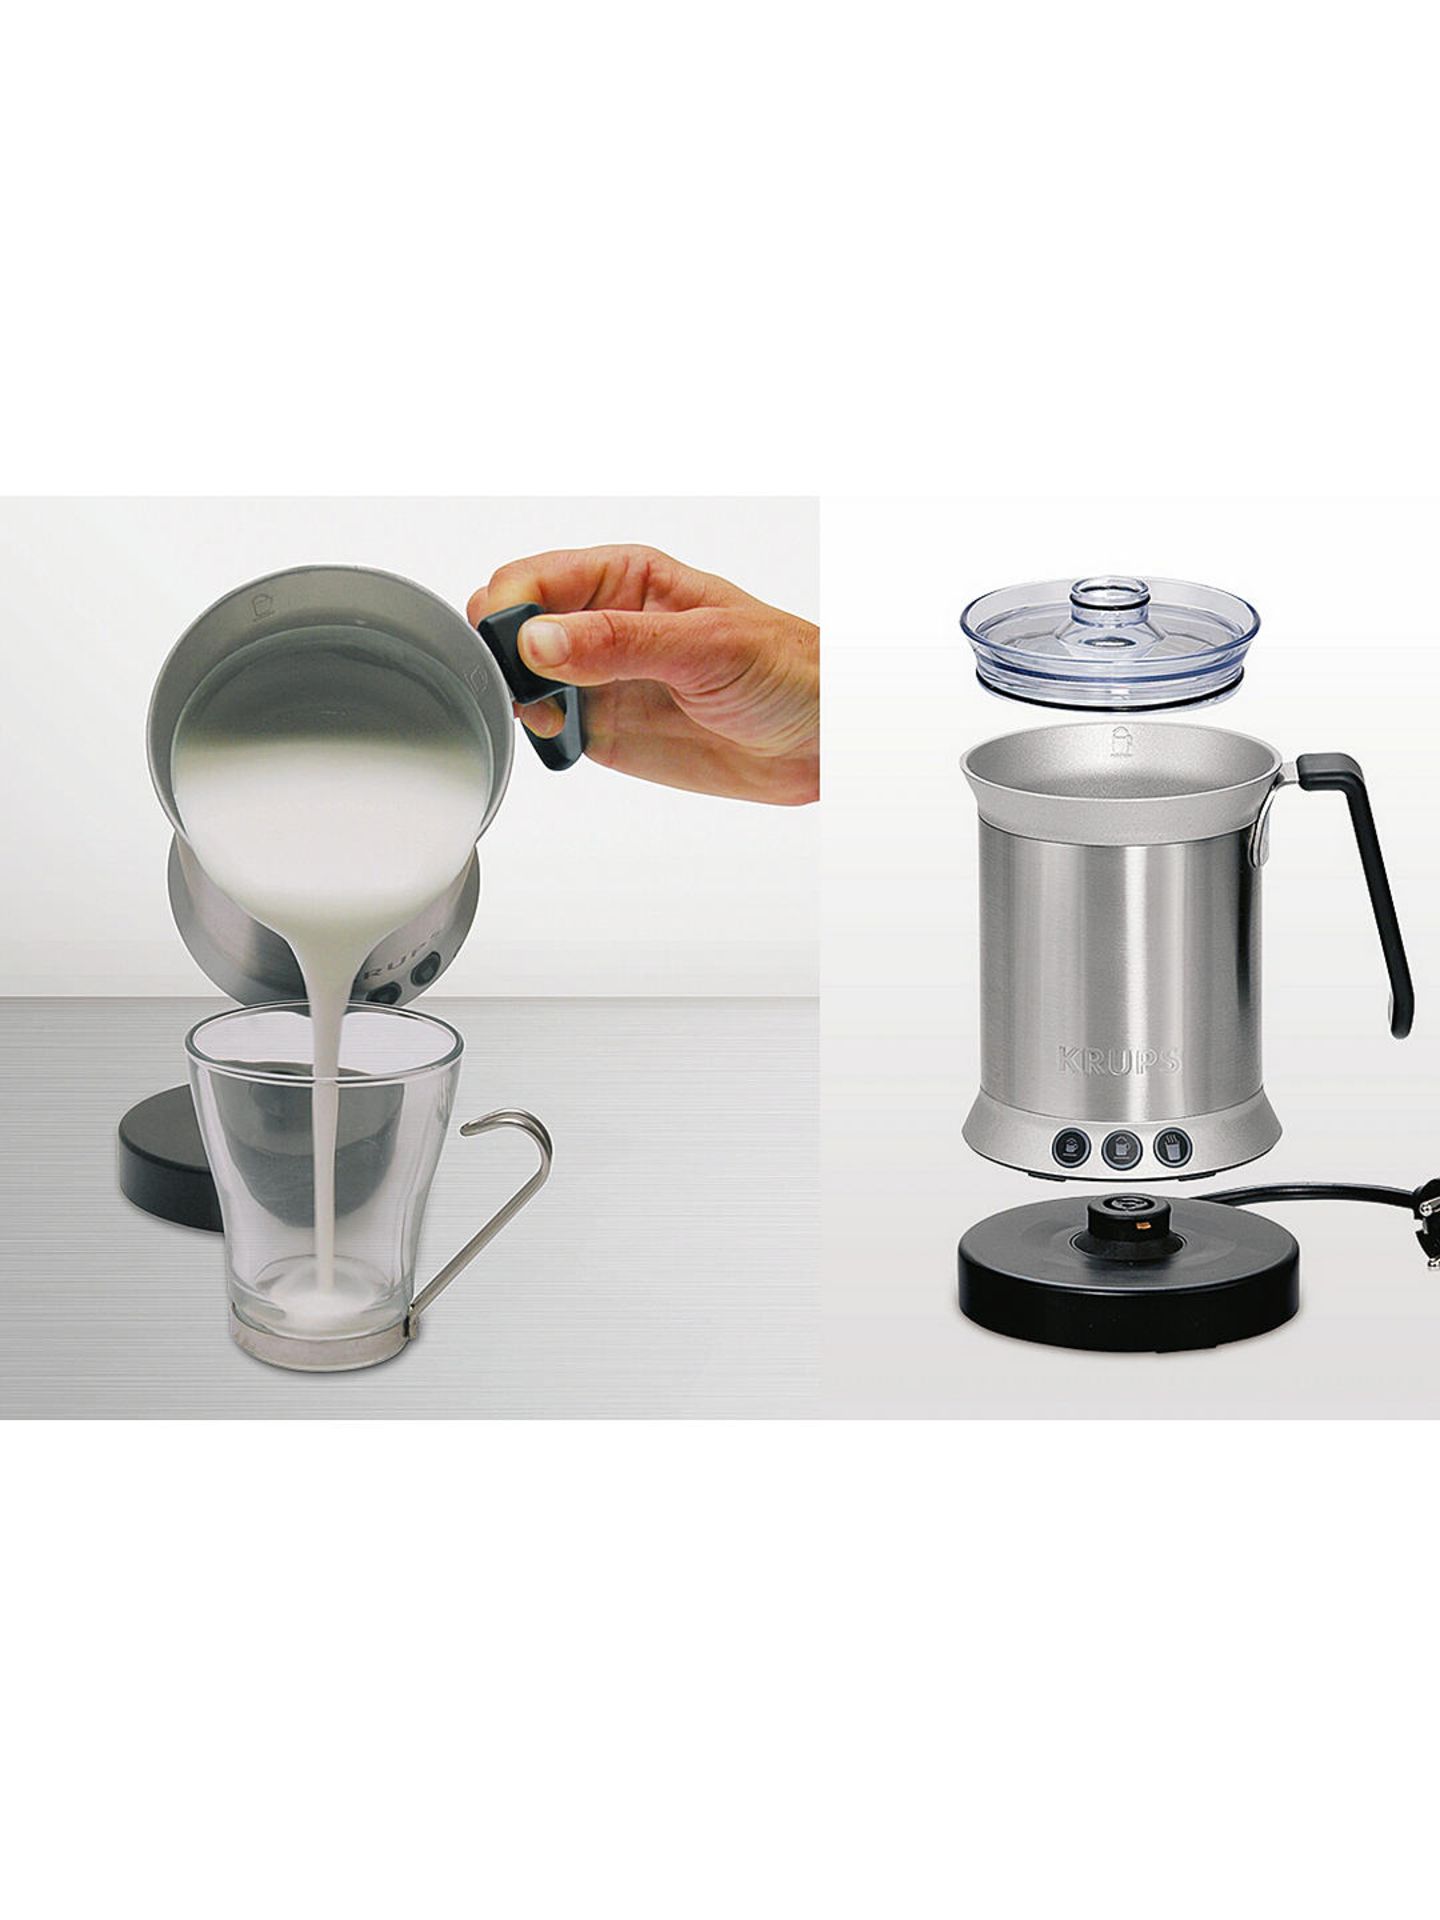 V Brand New Krups Automatic Milk Frother XL2000 - eBay Price £149.10 - Image 2 of 2